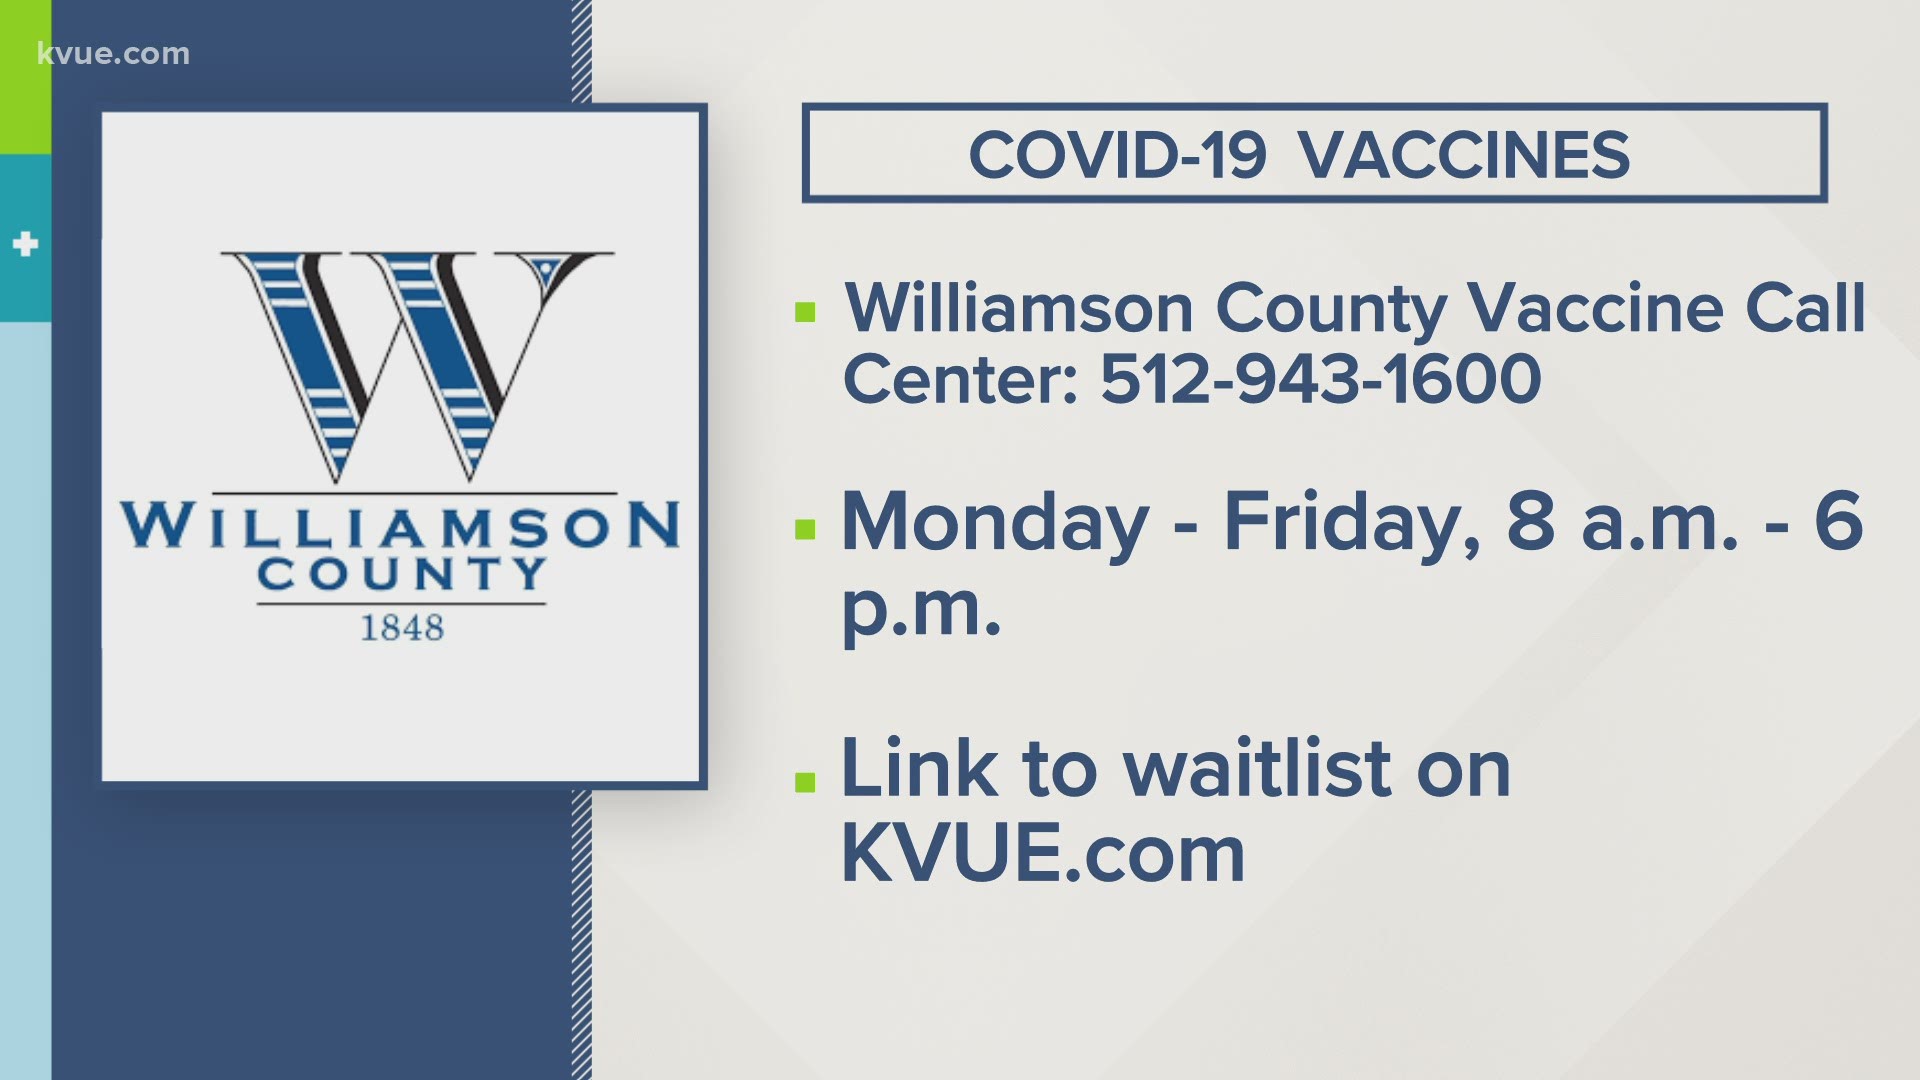 Williamson County will now handle the COVID-19 vaccine waitlist for all providers in the county.